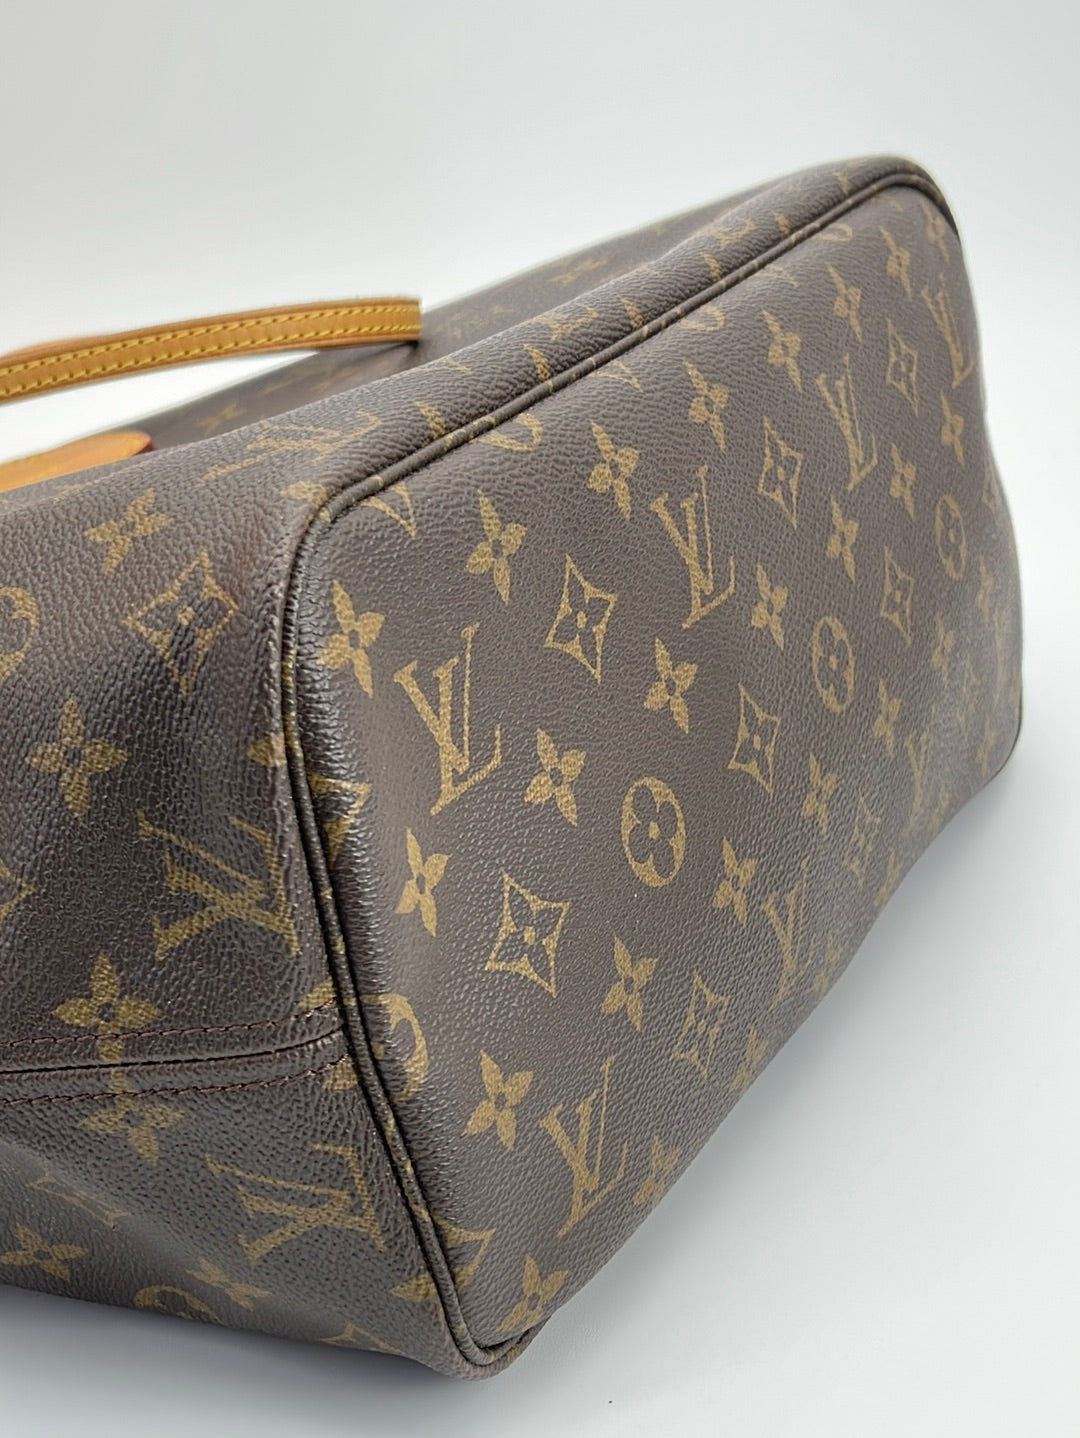 Buy [Used] Louis Vuitton Monogram Neverfull MM Tote Bag Tote Bag M41177  Brown PVC Bag M41177 from Japan - Buy authentic Plus exclusive items from  Japan